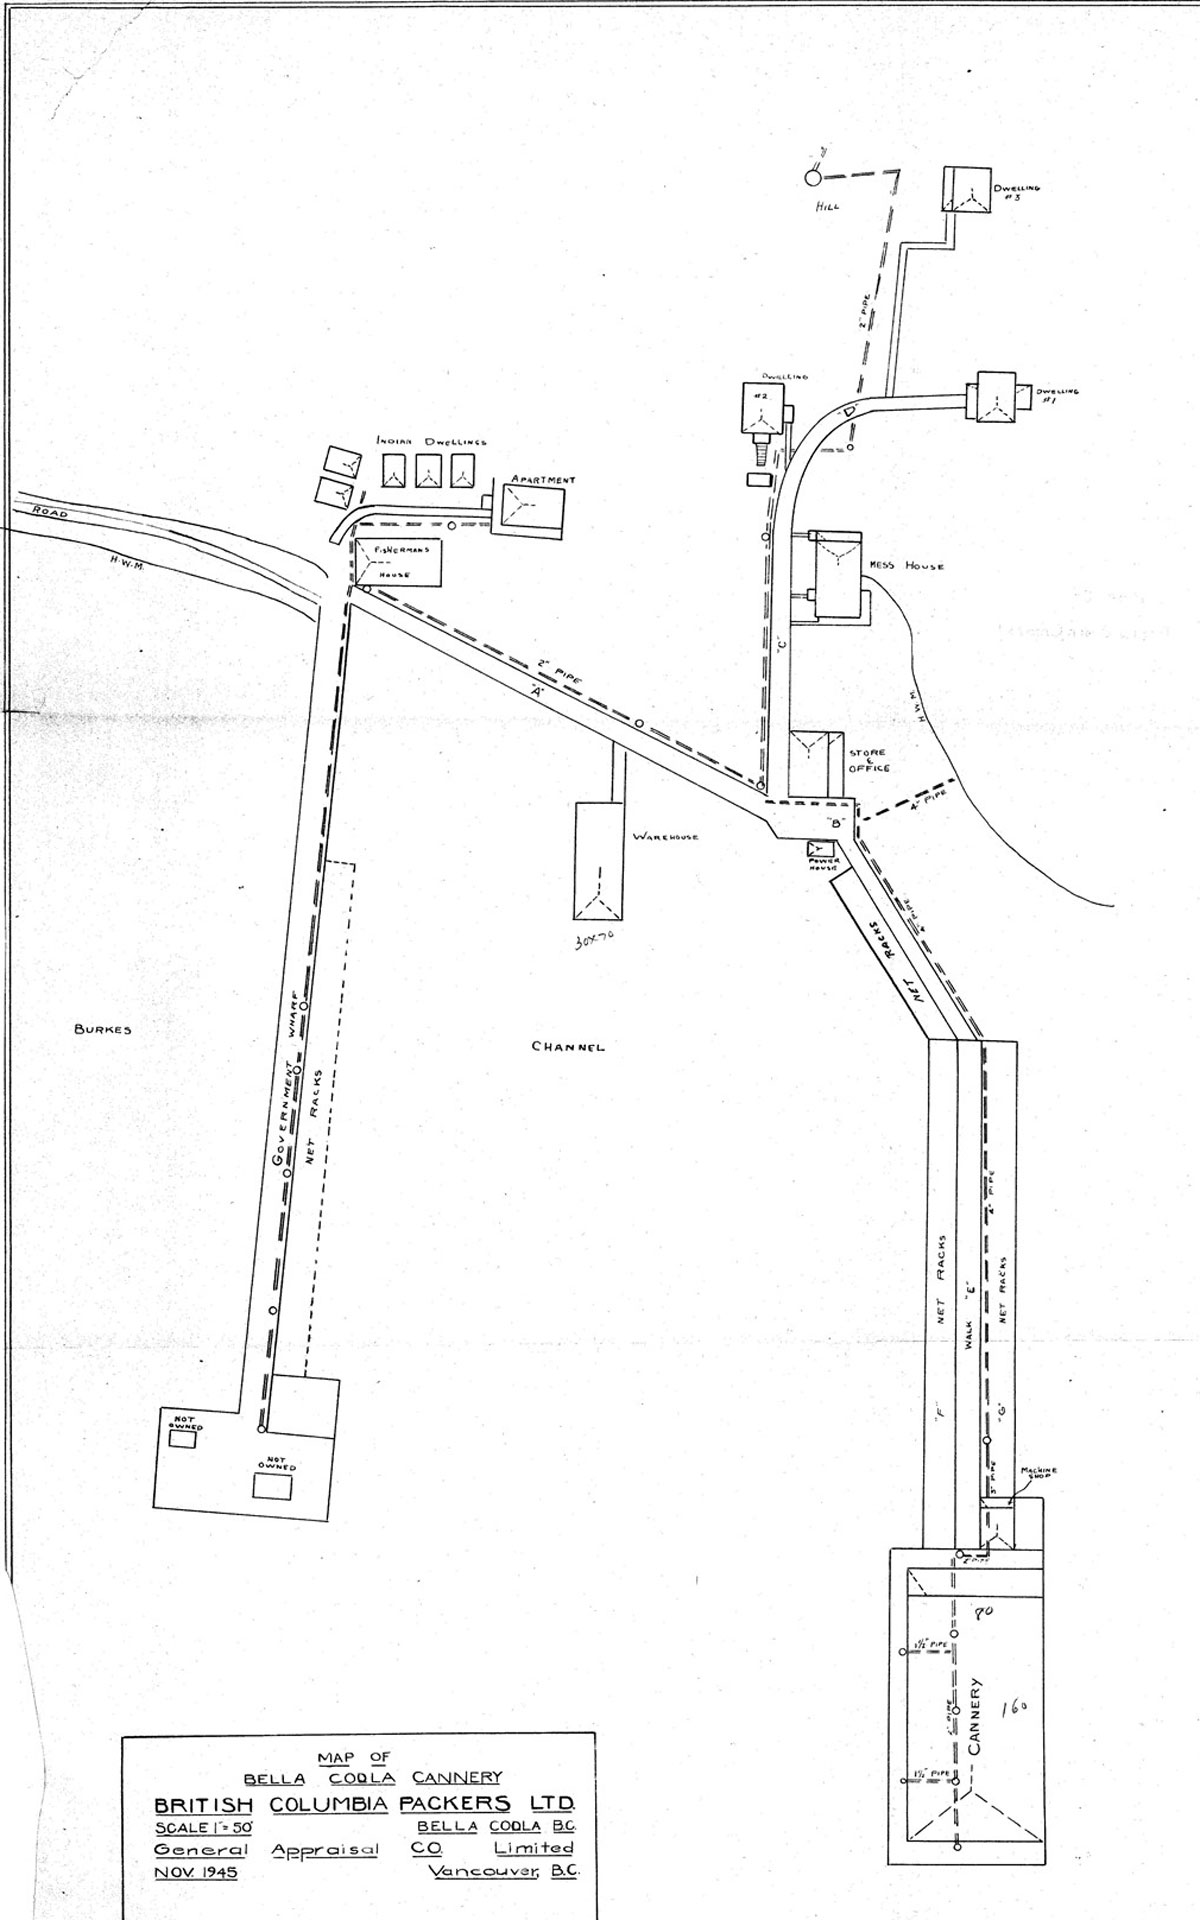 Scale plan of cannery showing buildings and wharves.